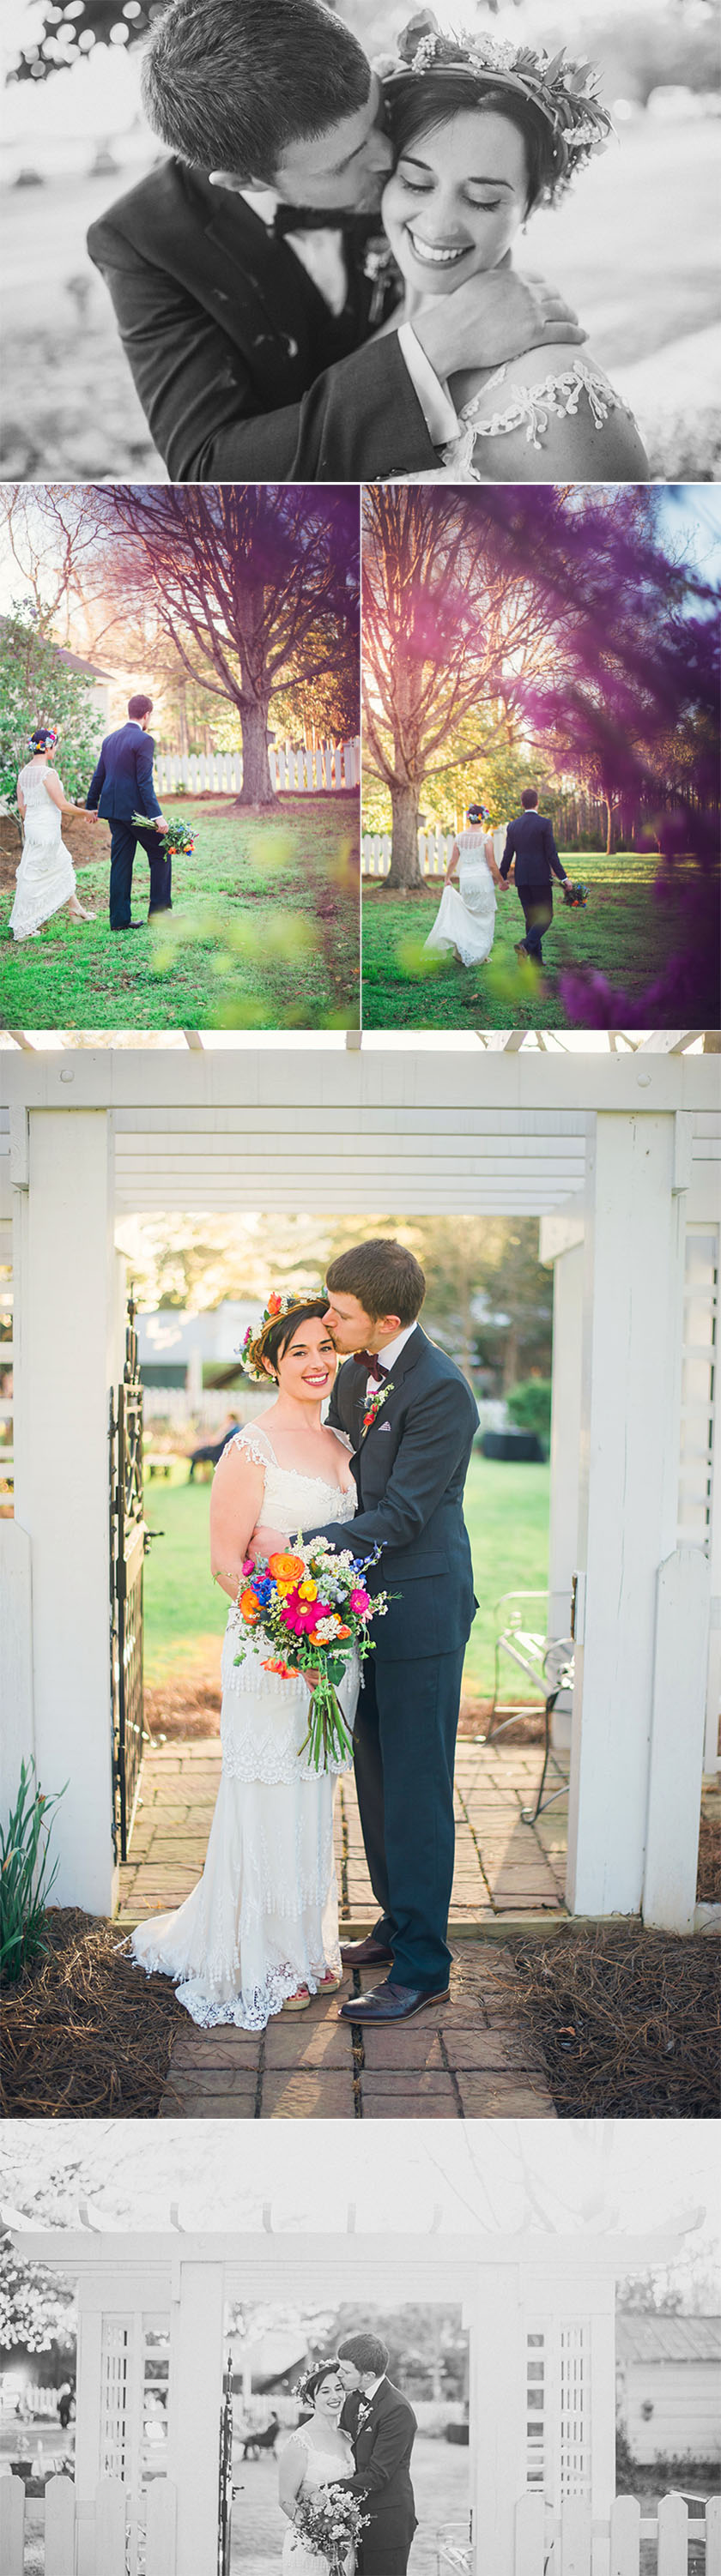 Connection_Photography_Raleigh_Wedding_38